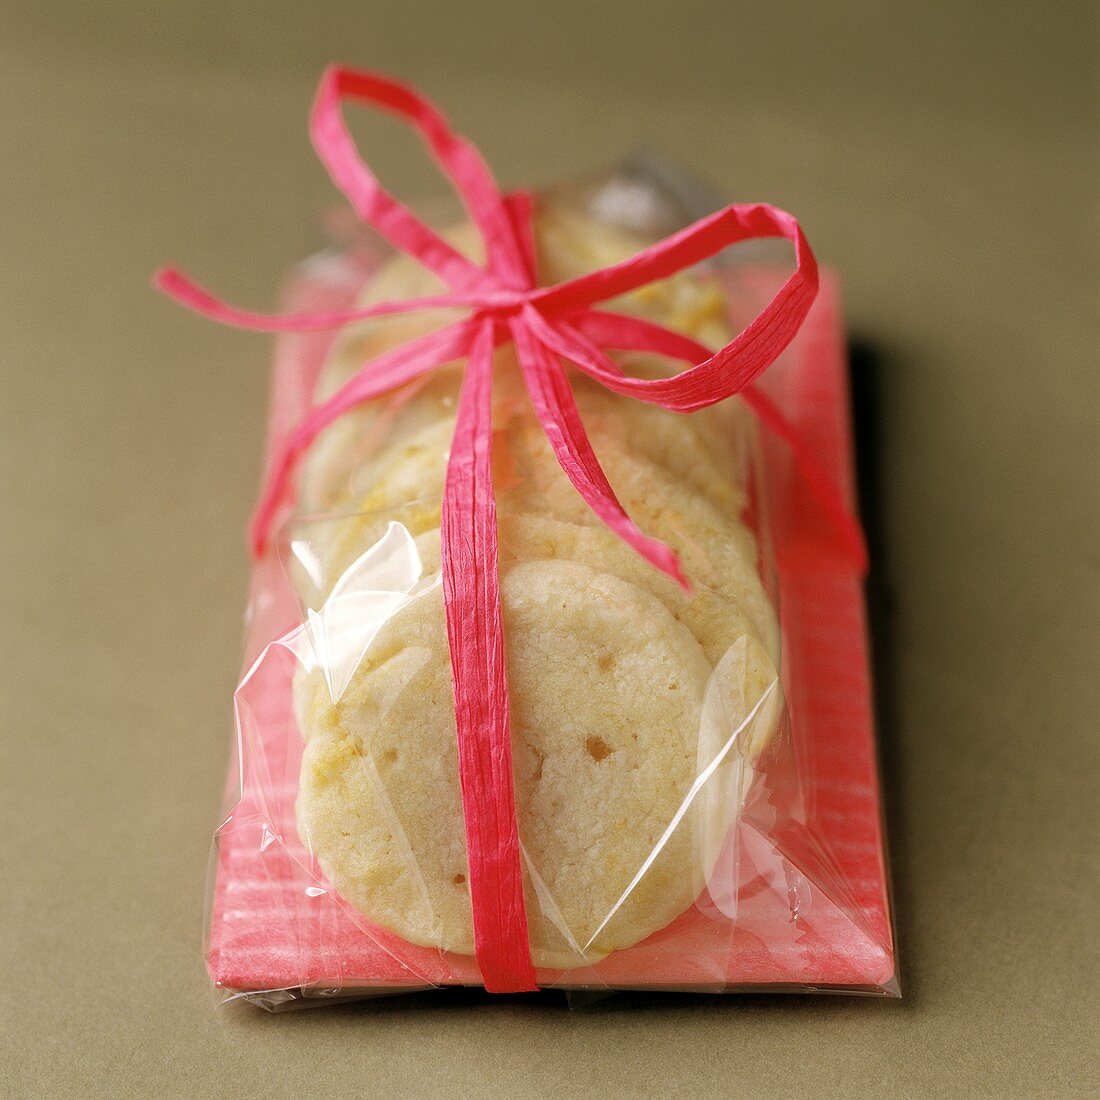 Lemon biscuits as a gift